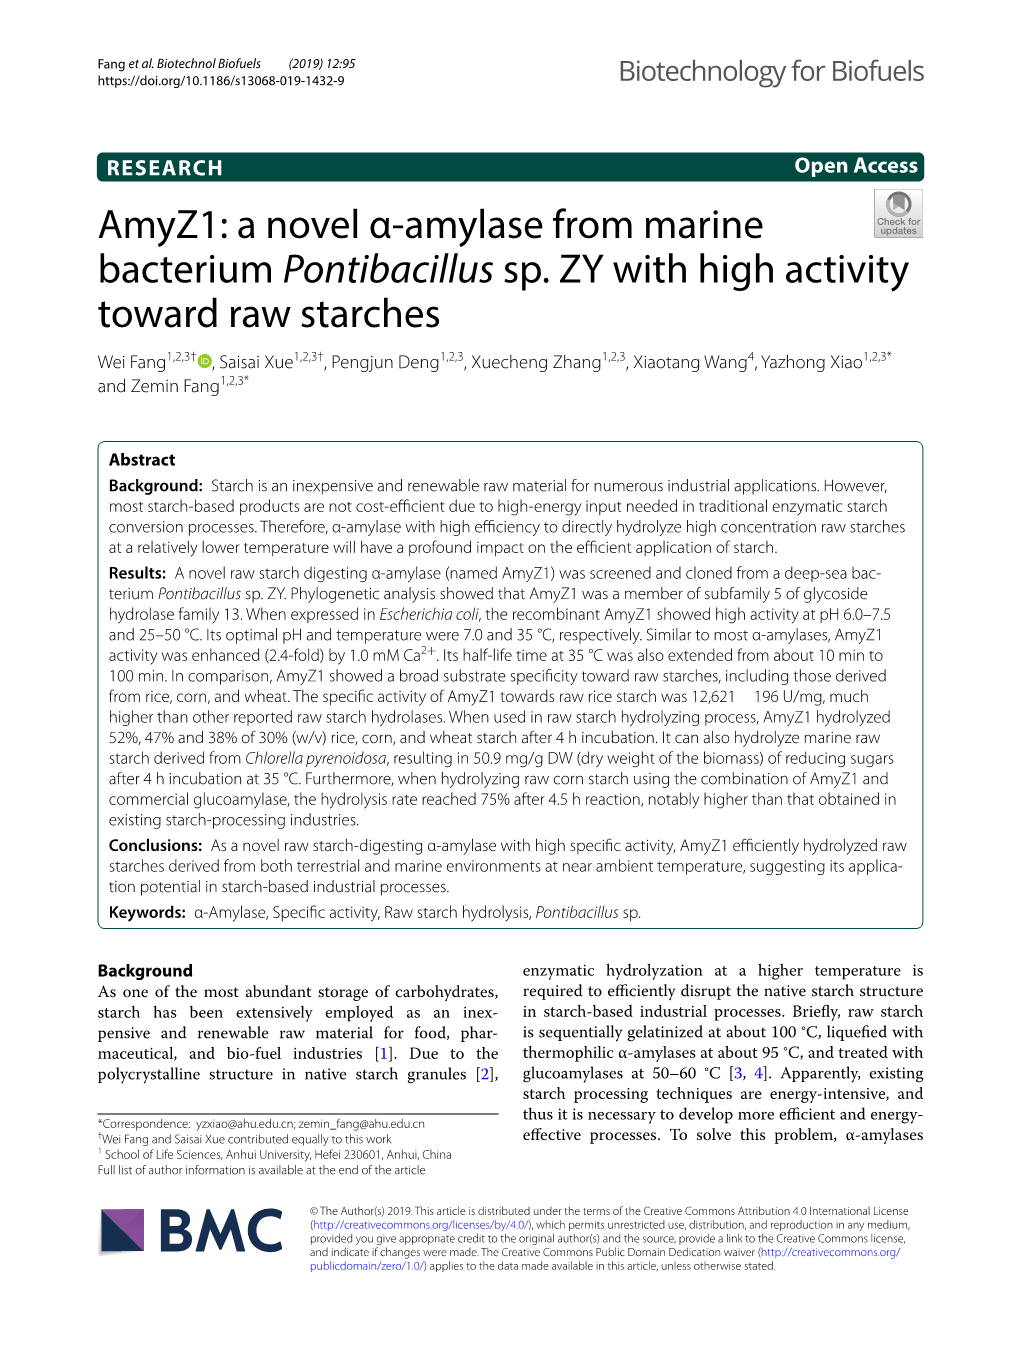 A Novel Α-Amylase from Marine Bacterium Pontibacillus Sp. ZY with High Activity Toward Raw Starches